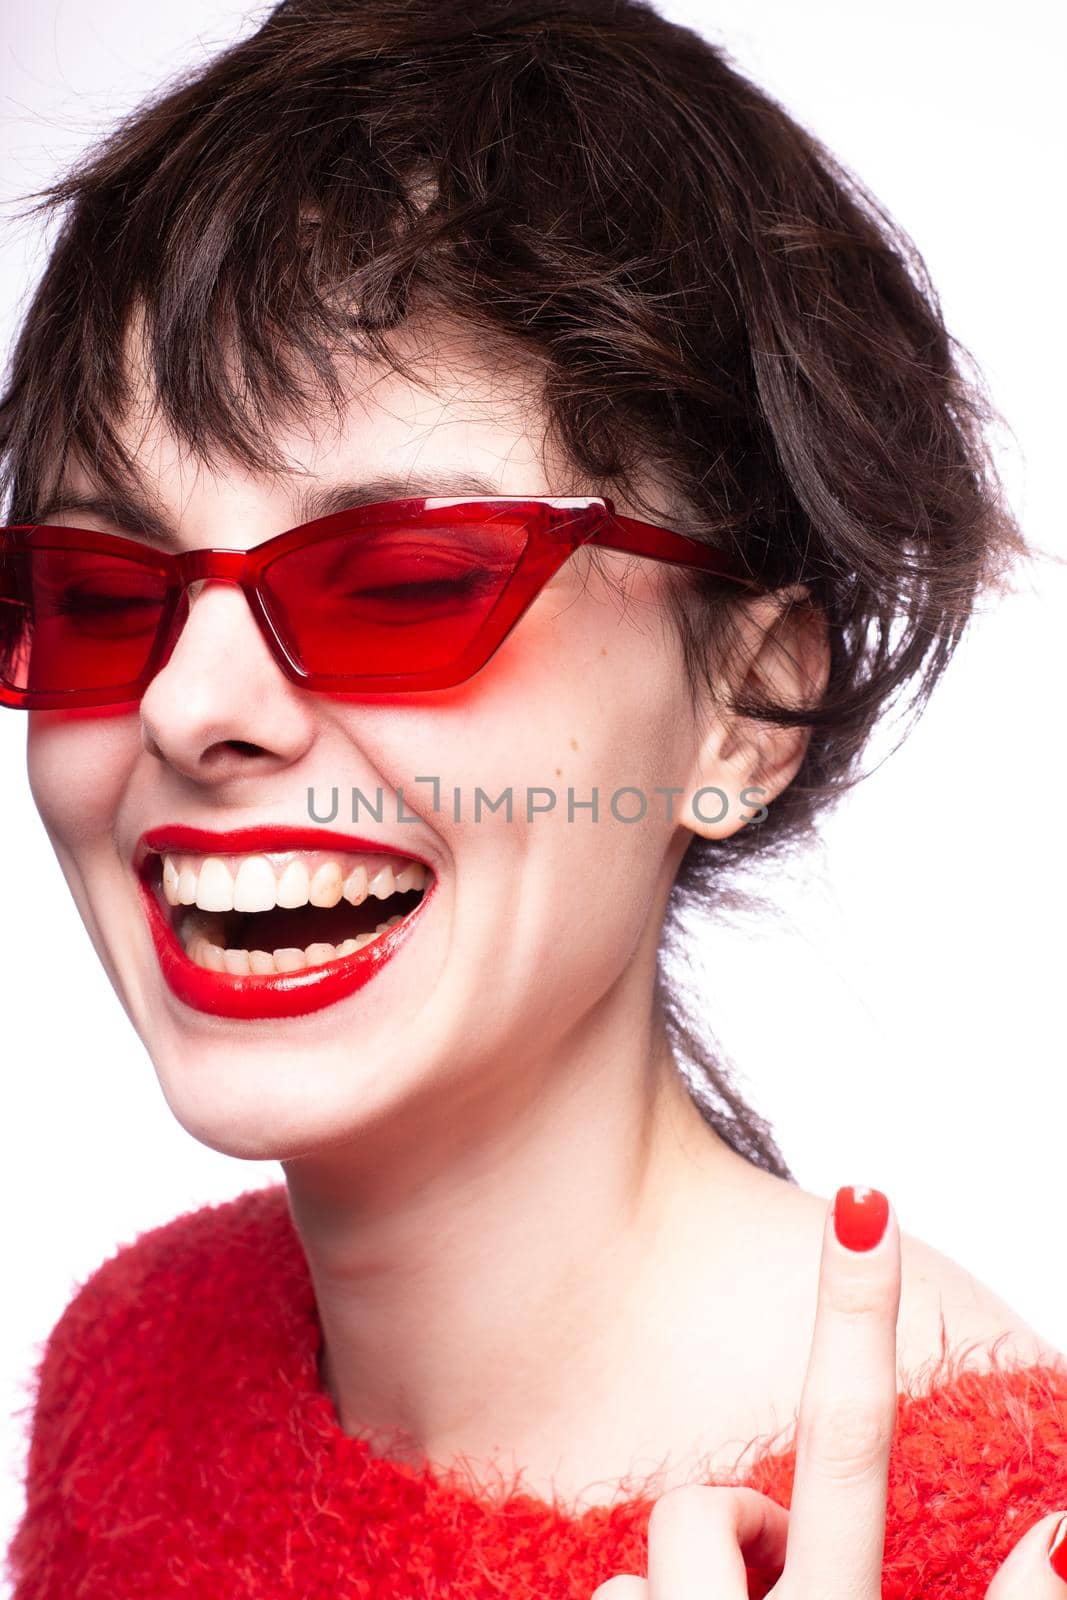 emotional brunette woman in red sunglasses, red nails, red lipstick, white background. High quality photo